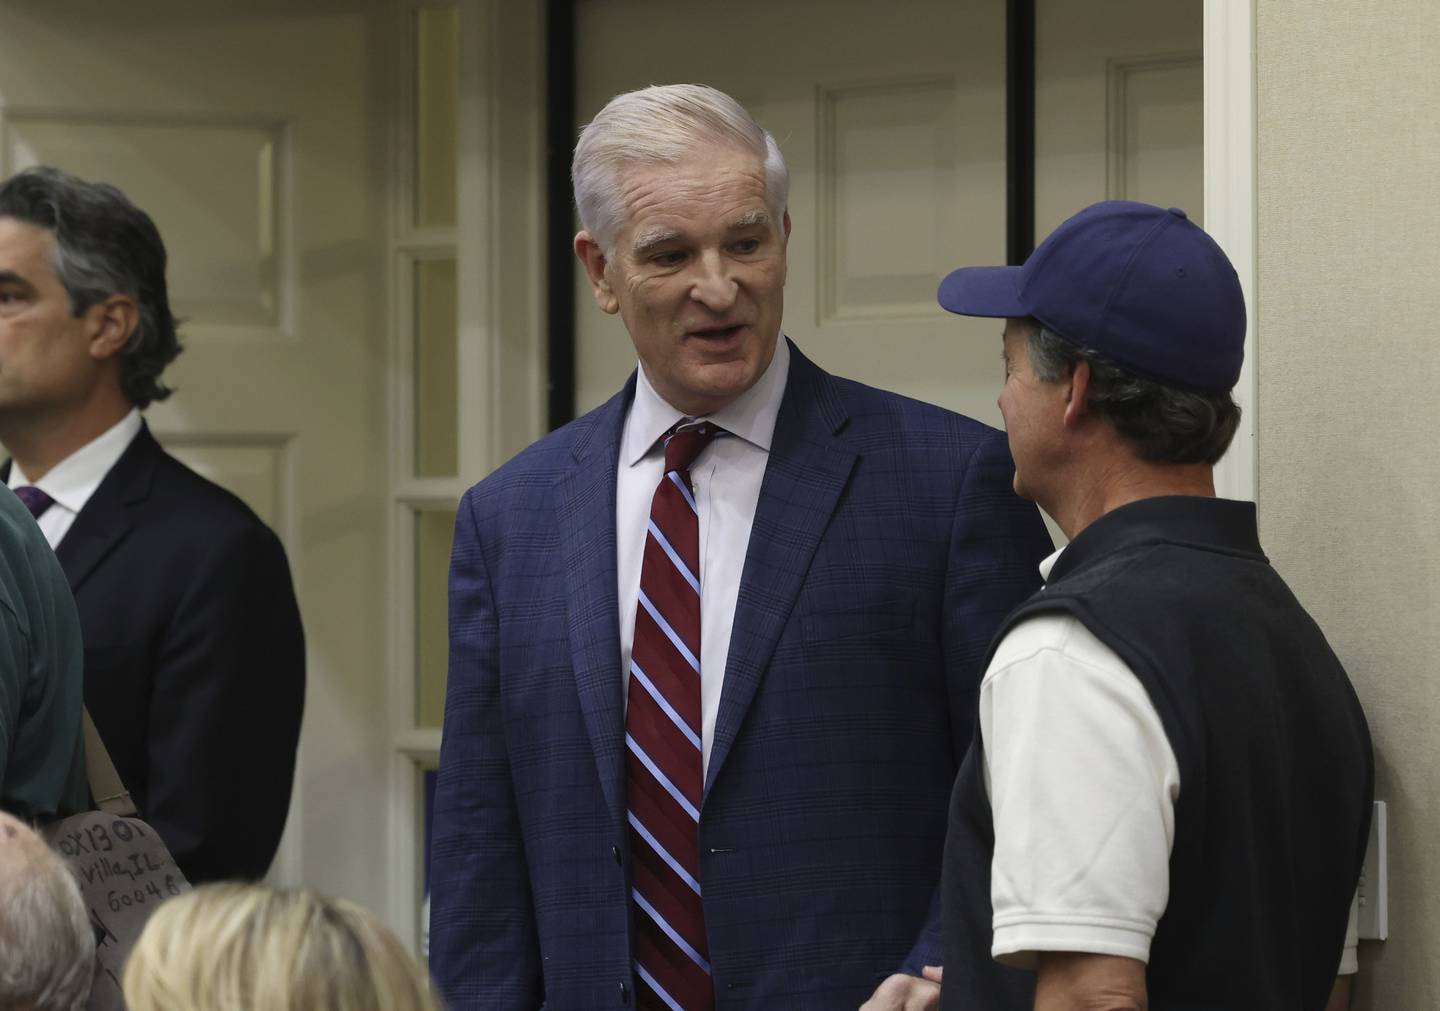 Mark Curran, Republican candidate for the Illinois Supreme Court, center, talks with a supporter at a meet-and-greet held by the Women's Republican Club of Lake Forest-Lake Bluff at the Gorton Community Center in Lake Forest on Oct. 12, 2022.  